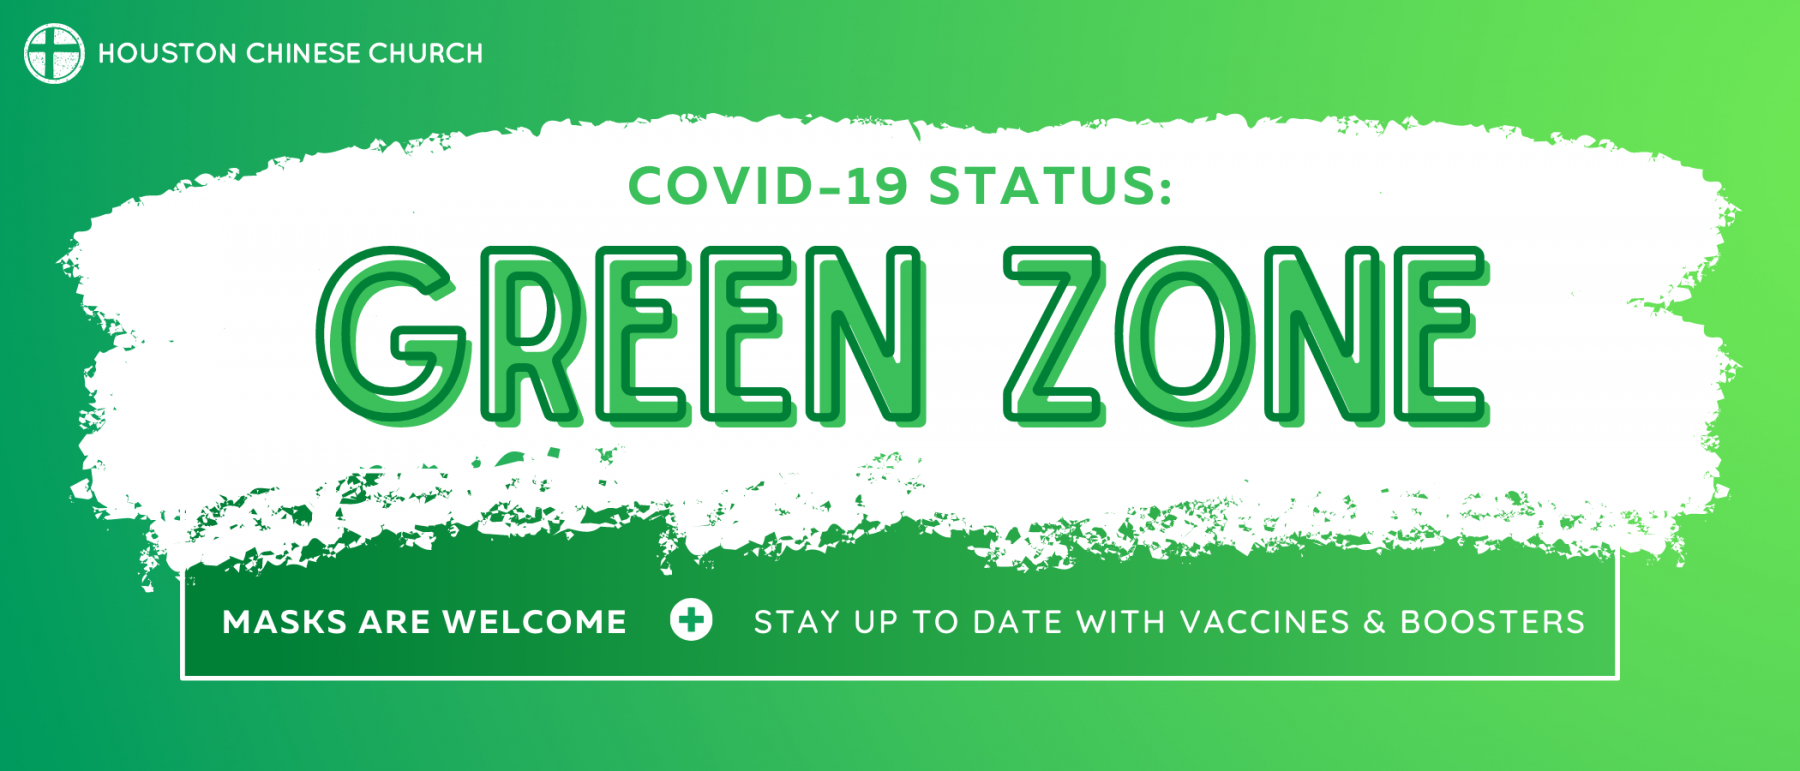 Current HCC COVID-19 Status is green zone.